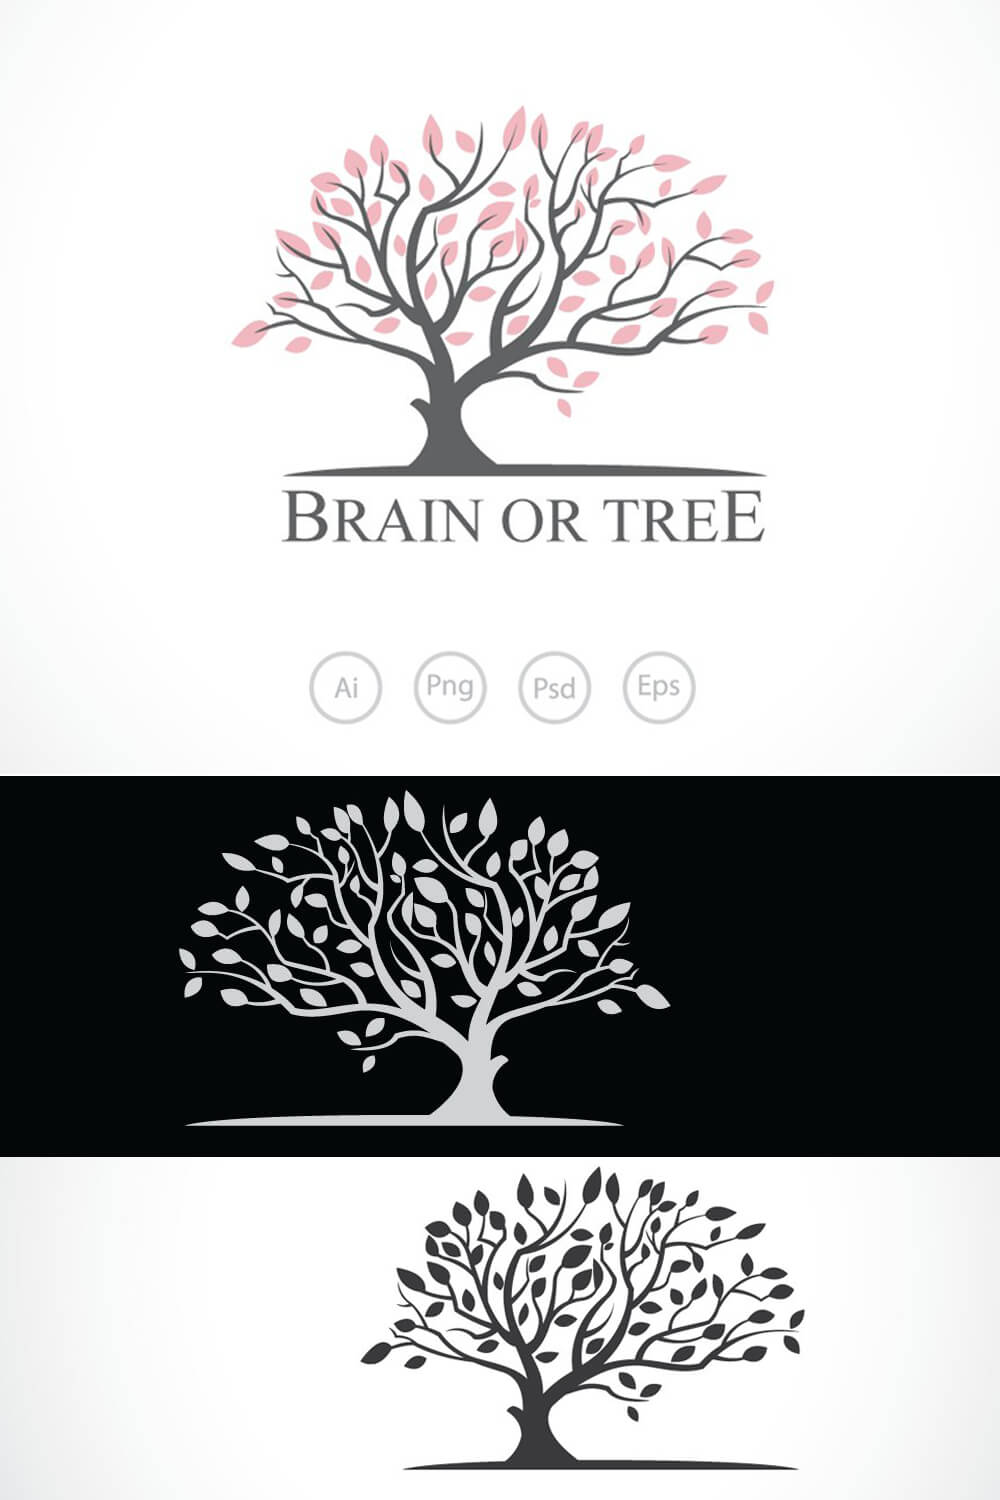 Drawing of a gray tree with pink leaves with the caption "Brain or tree", a white silhouette of a tree on a black background and a gray silhouette of a tree on a white background.